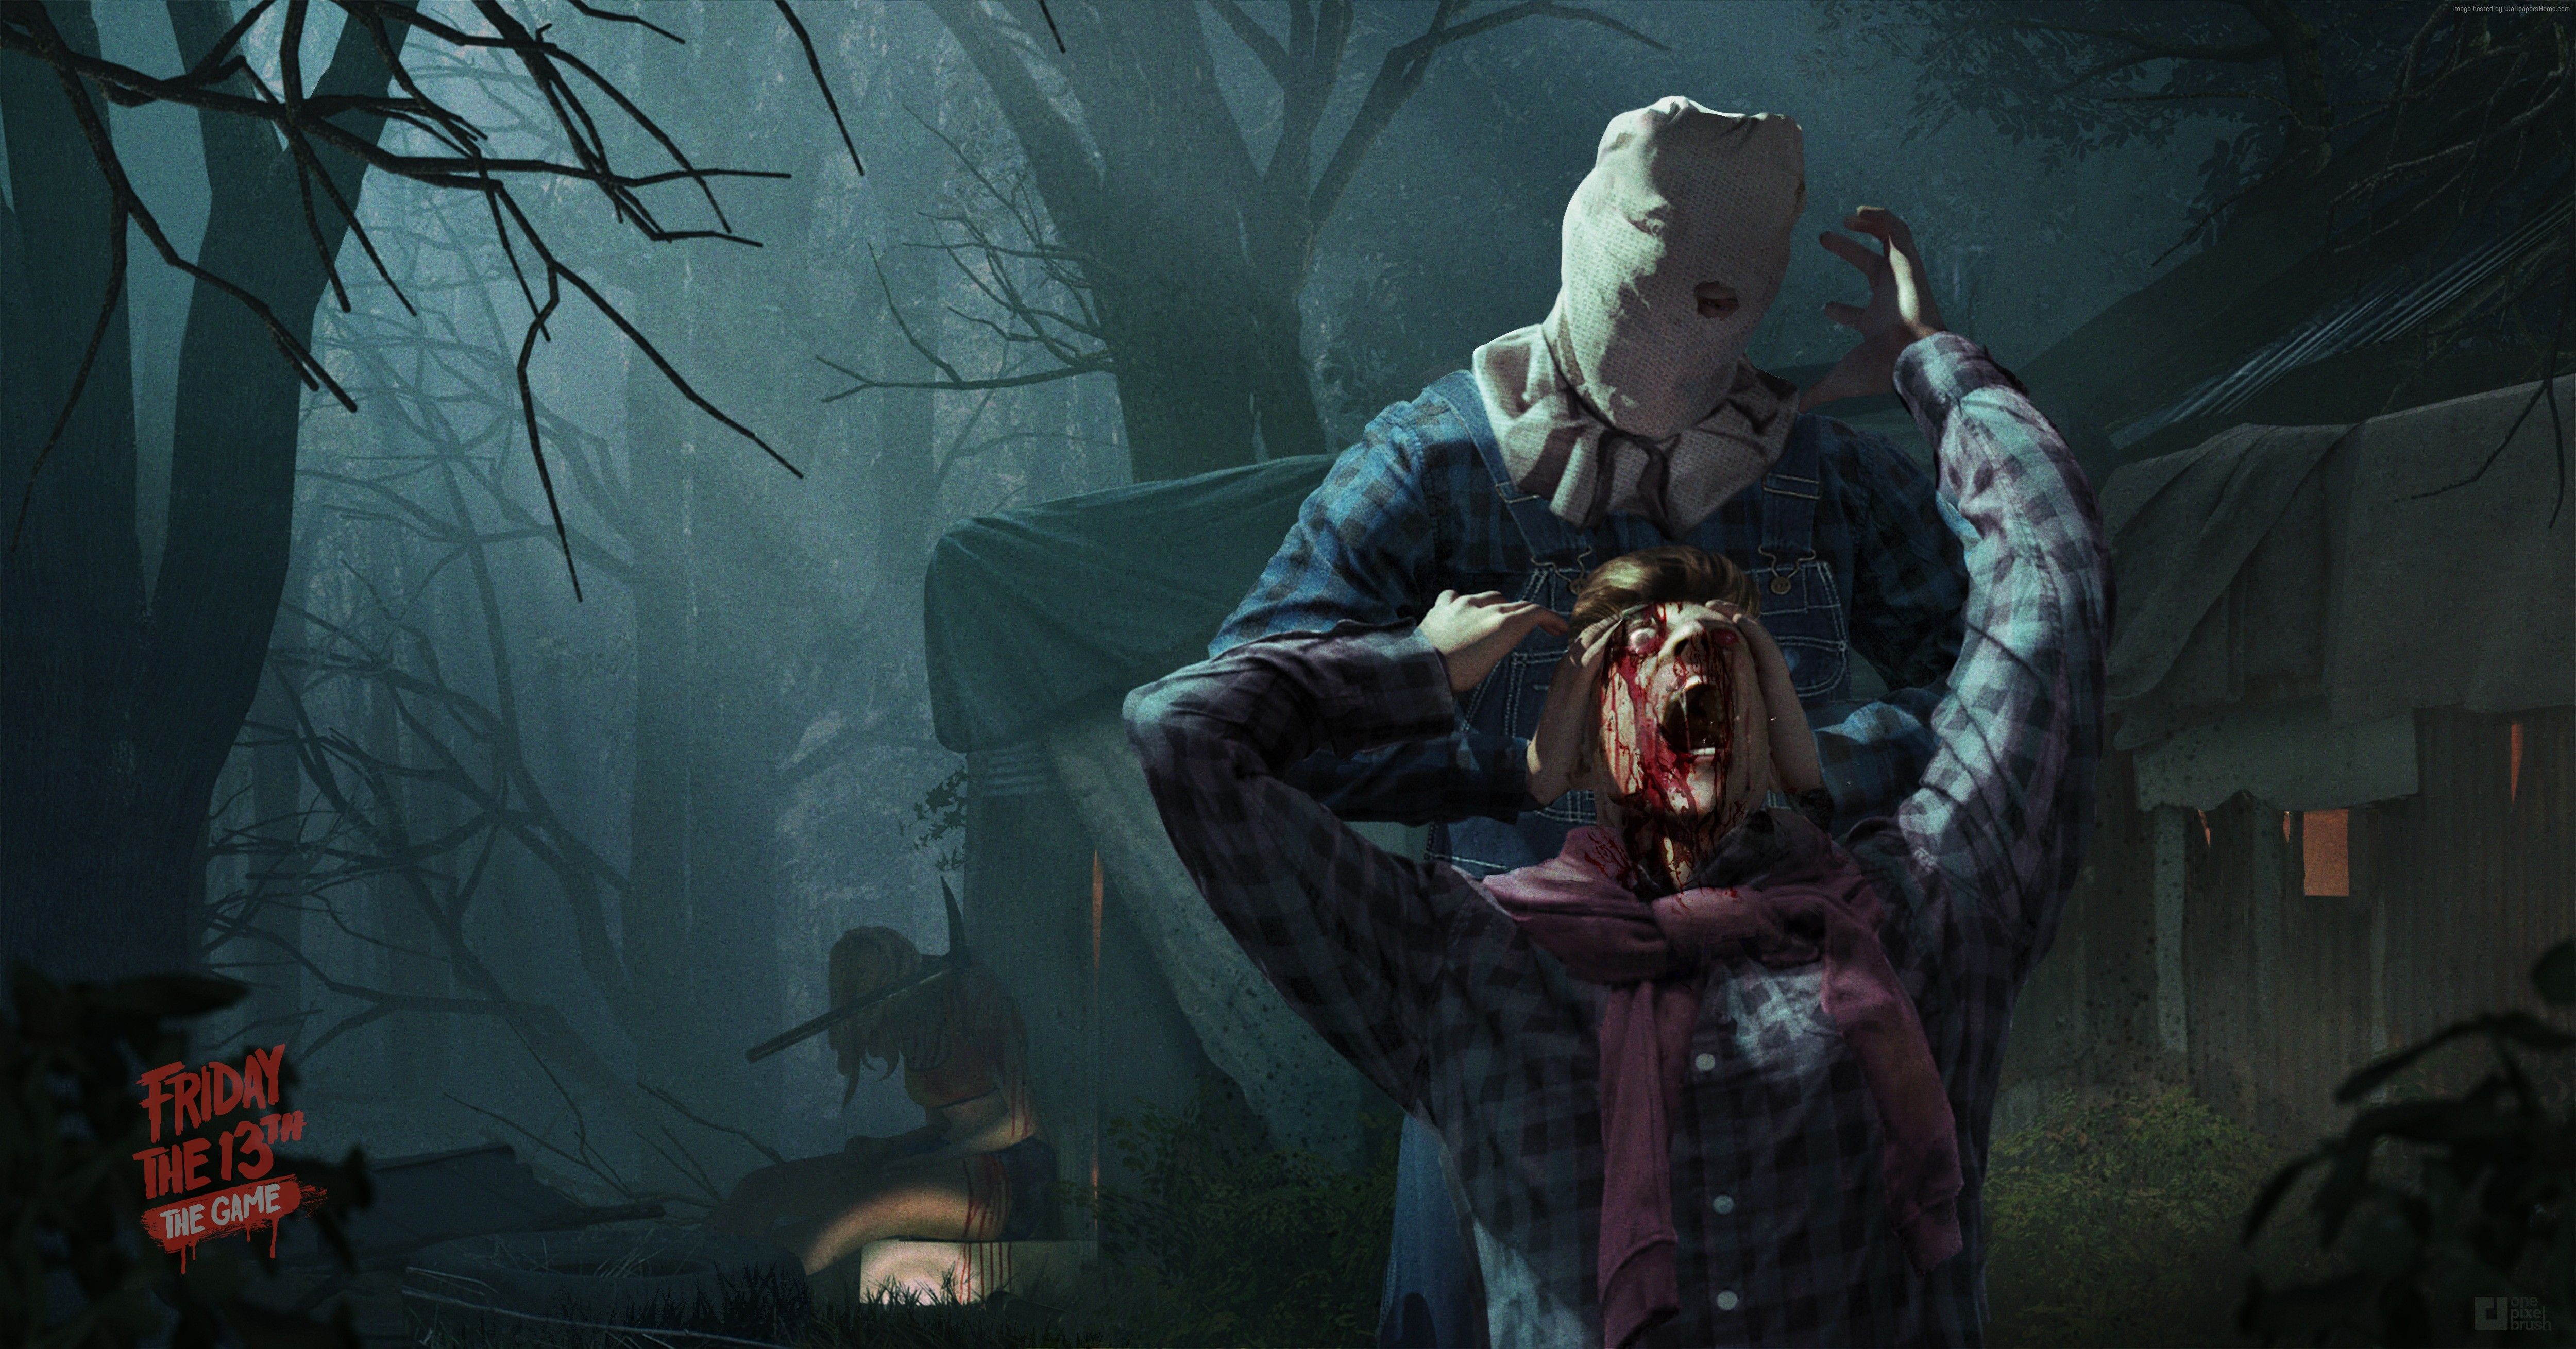 Friday the 13th: The Game Wallpaper, Games: Friday the 13th: The ...